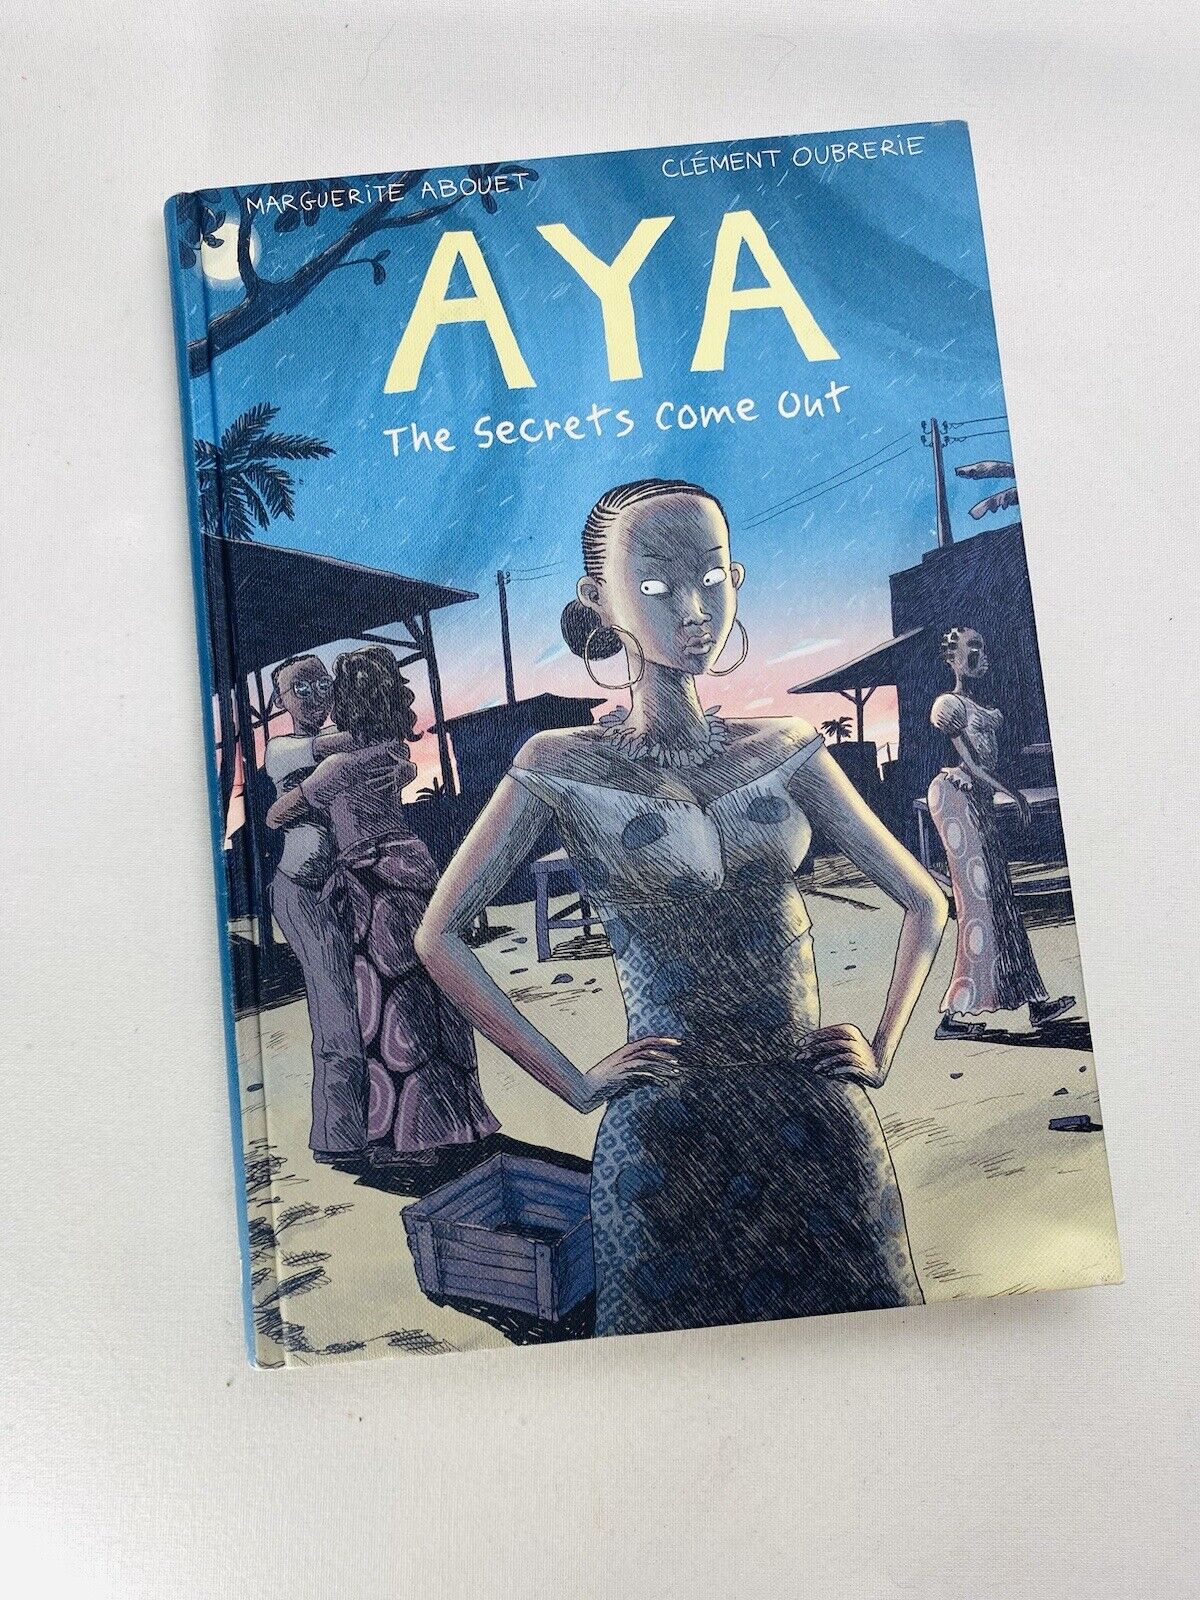 AYA The Secrets Come Out. Vol 3. Hardcover. Graphic Novel - Used .